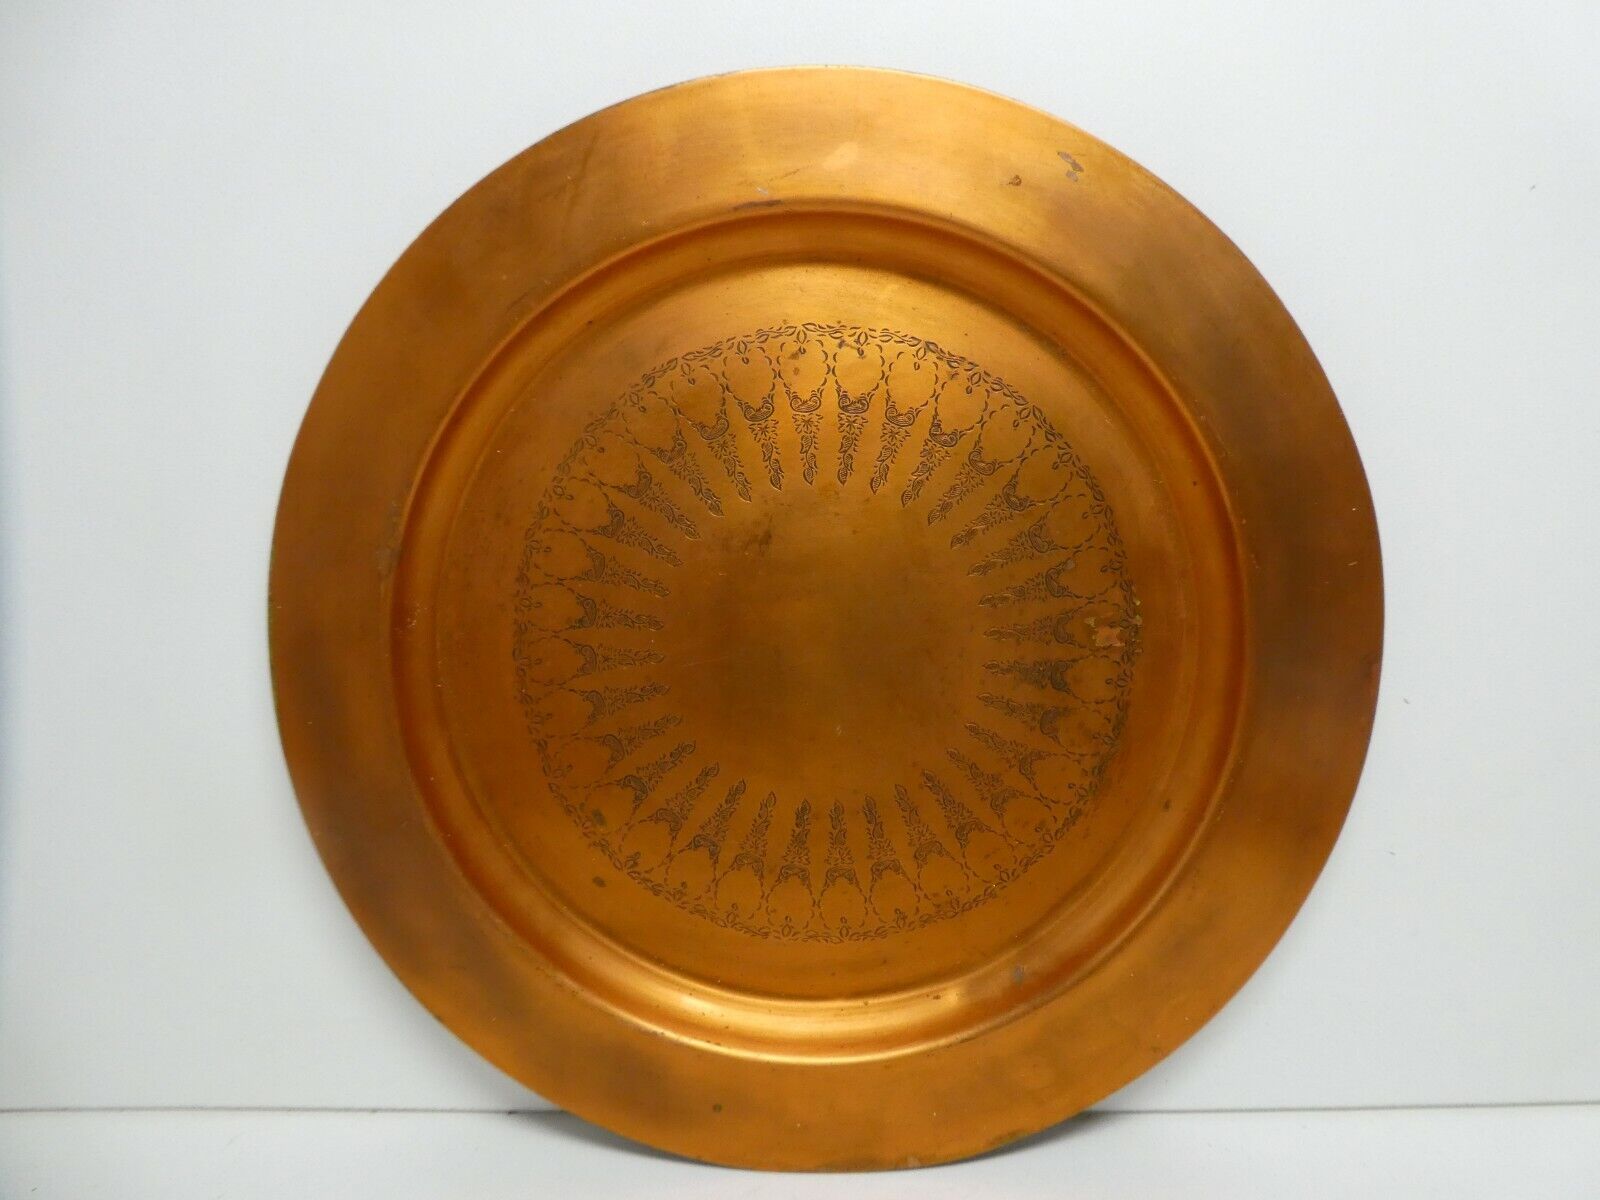 Antique Valuations: VINTAGE LARGE HEAVY COPPER PLATE EASTERN ENGRAVED PLATTER TRAY CHARGER